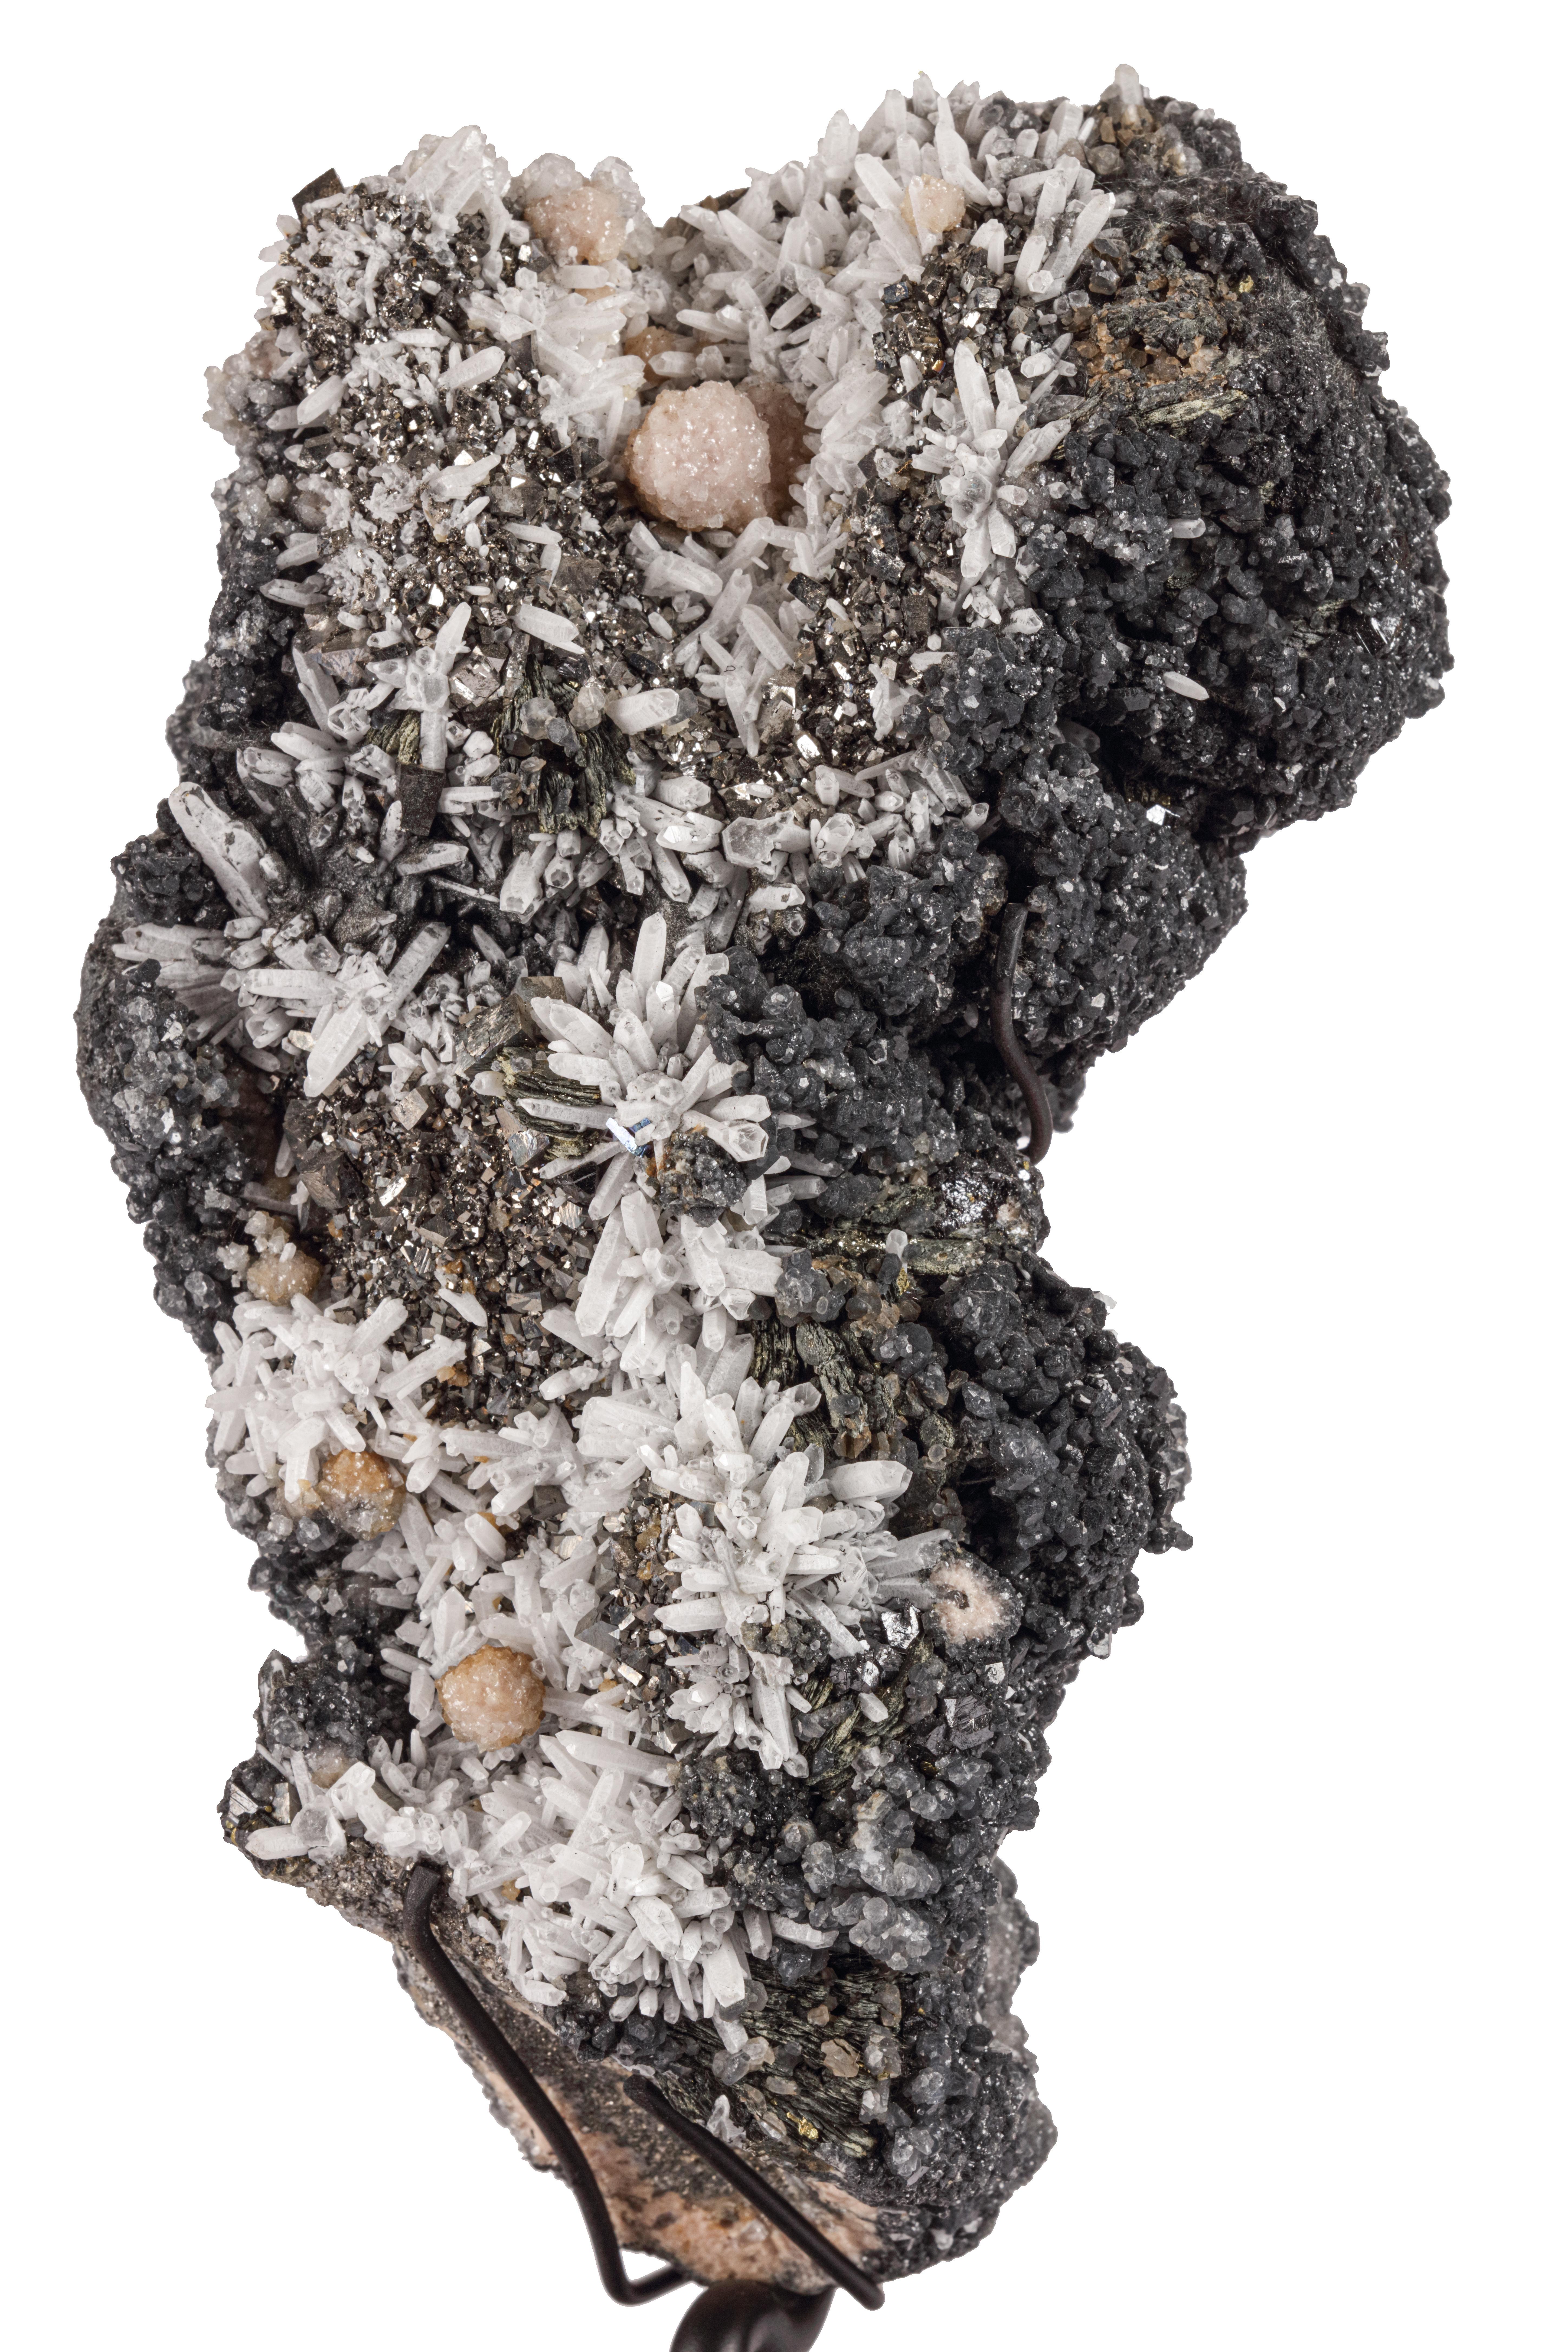 A collection of splendid mineral specimens naturally formed resembling snowy mountains
All found in Trepca, Kosovo

 
From left to right:

Sphalerite, Rock Crystal, Pyrite & Calcite

Measures: H. 16 x L. 36 x W. 26. cm

Galenite, Rock